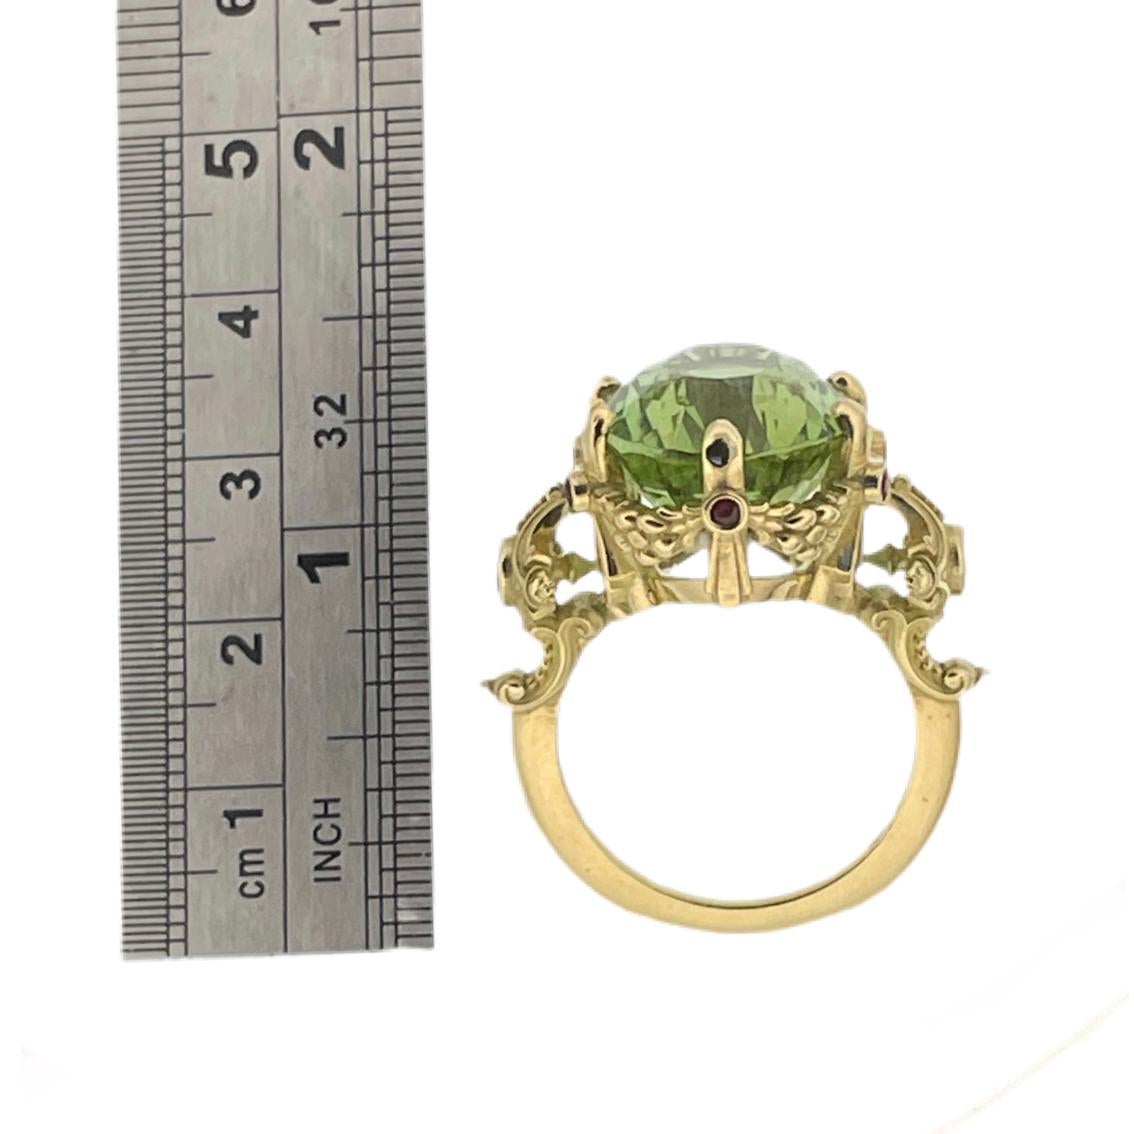 21ct Green Tourmaline, Rubies, Diamonds, & 18k Yellow Gold Antique Style Ring For Sale 9